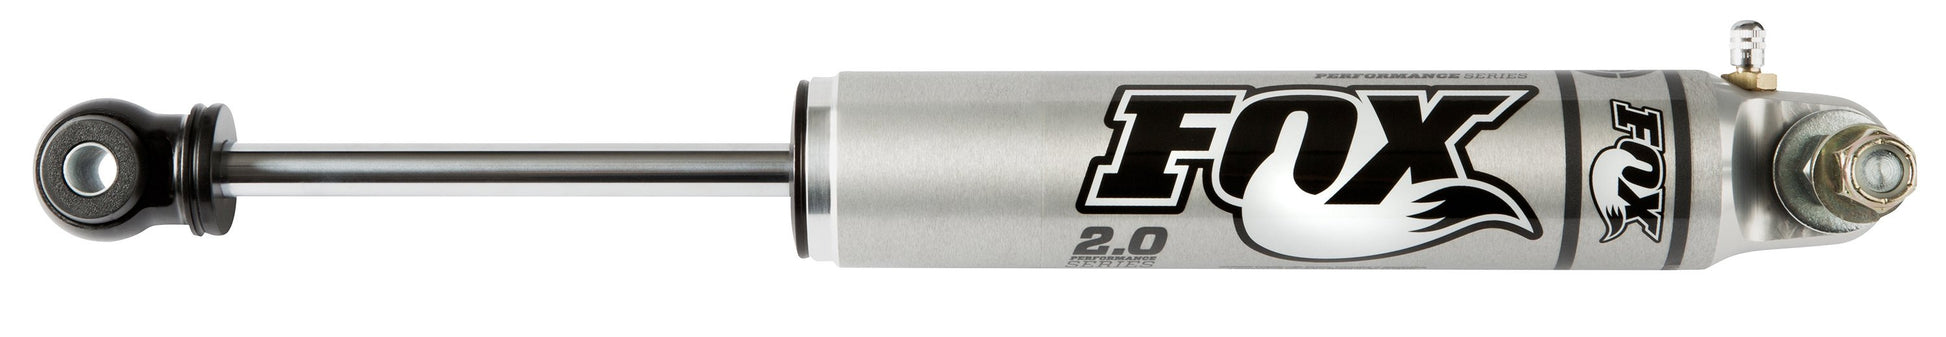 PERFORMANCE SERIES 2.0 SMOOTH BODY IFP STABILIZER Steering Stabilizer 1999-2004 Ford F-350 Super Duty FOX-985-24-000 - 2.0 STABILIZER SHOCK - FOX Offroad Shocks - Texas Complete Truck Center